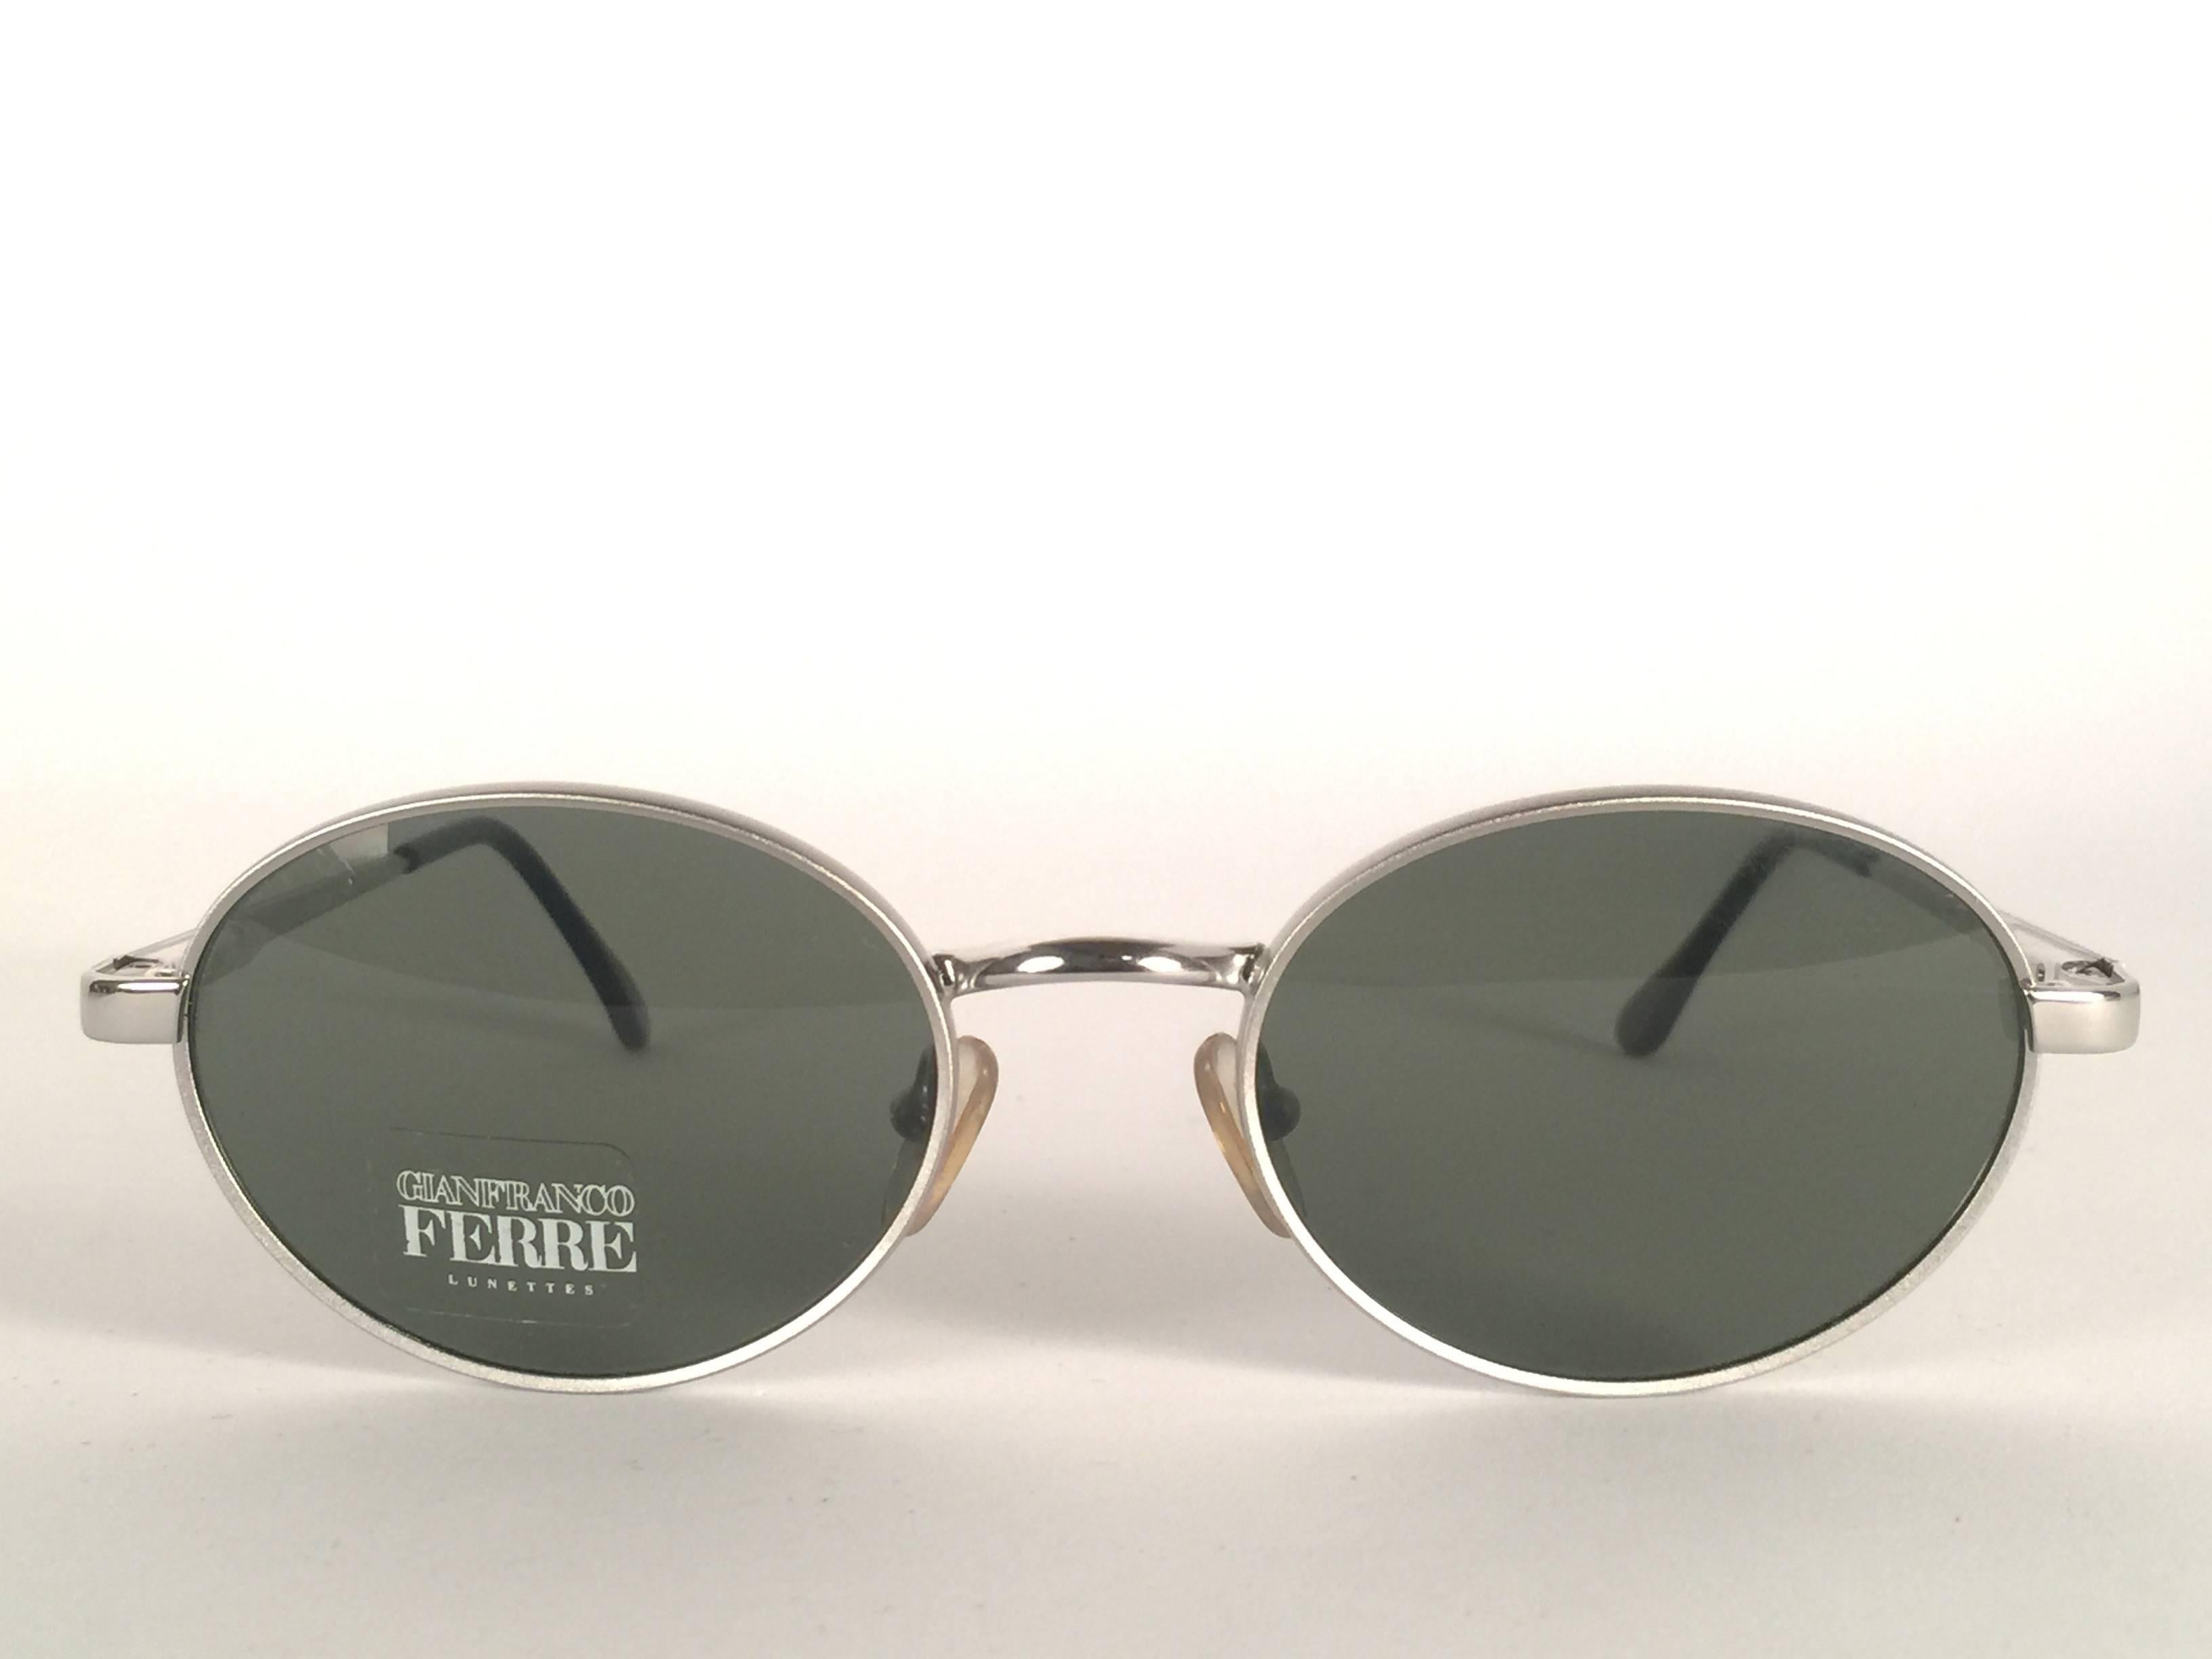 New vintage Gianfranco Ferre sunglasses.    

Oval silver frame holding a pair of spotless grey lenses.   

New, never worn or displayed. 

 Made in Italy.